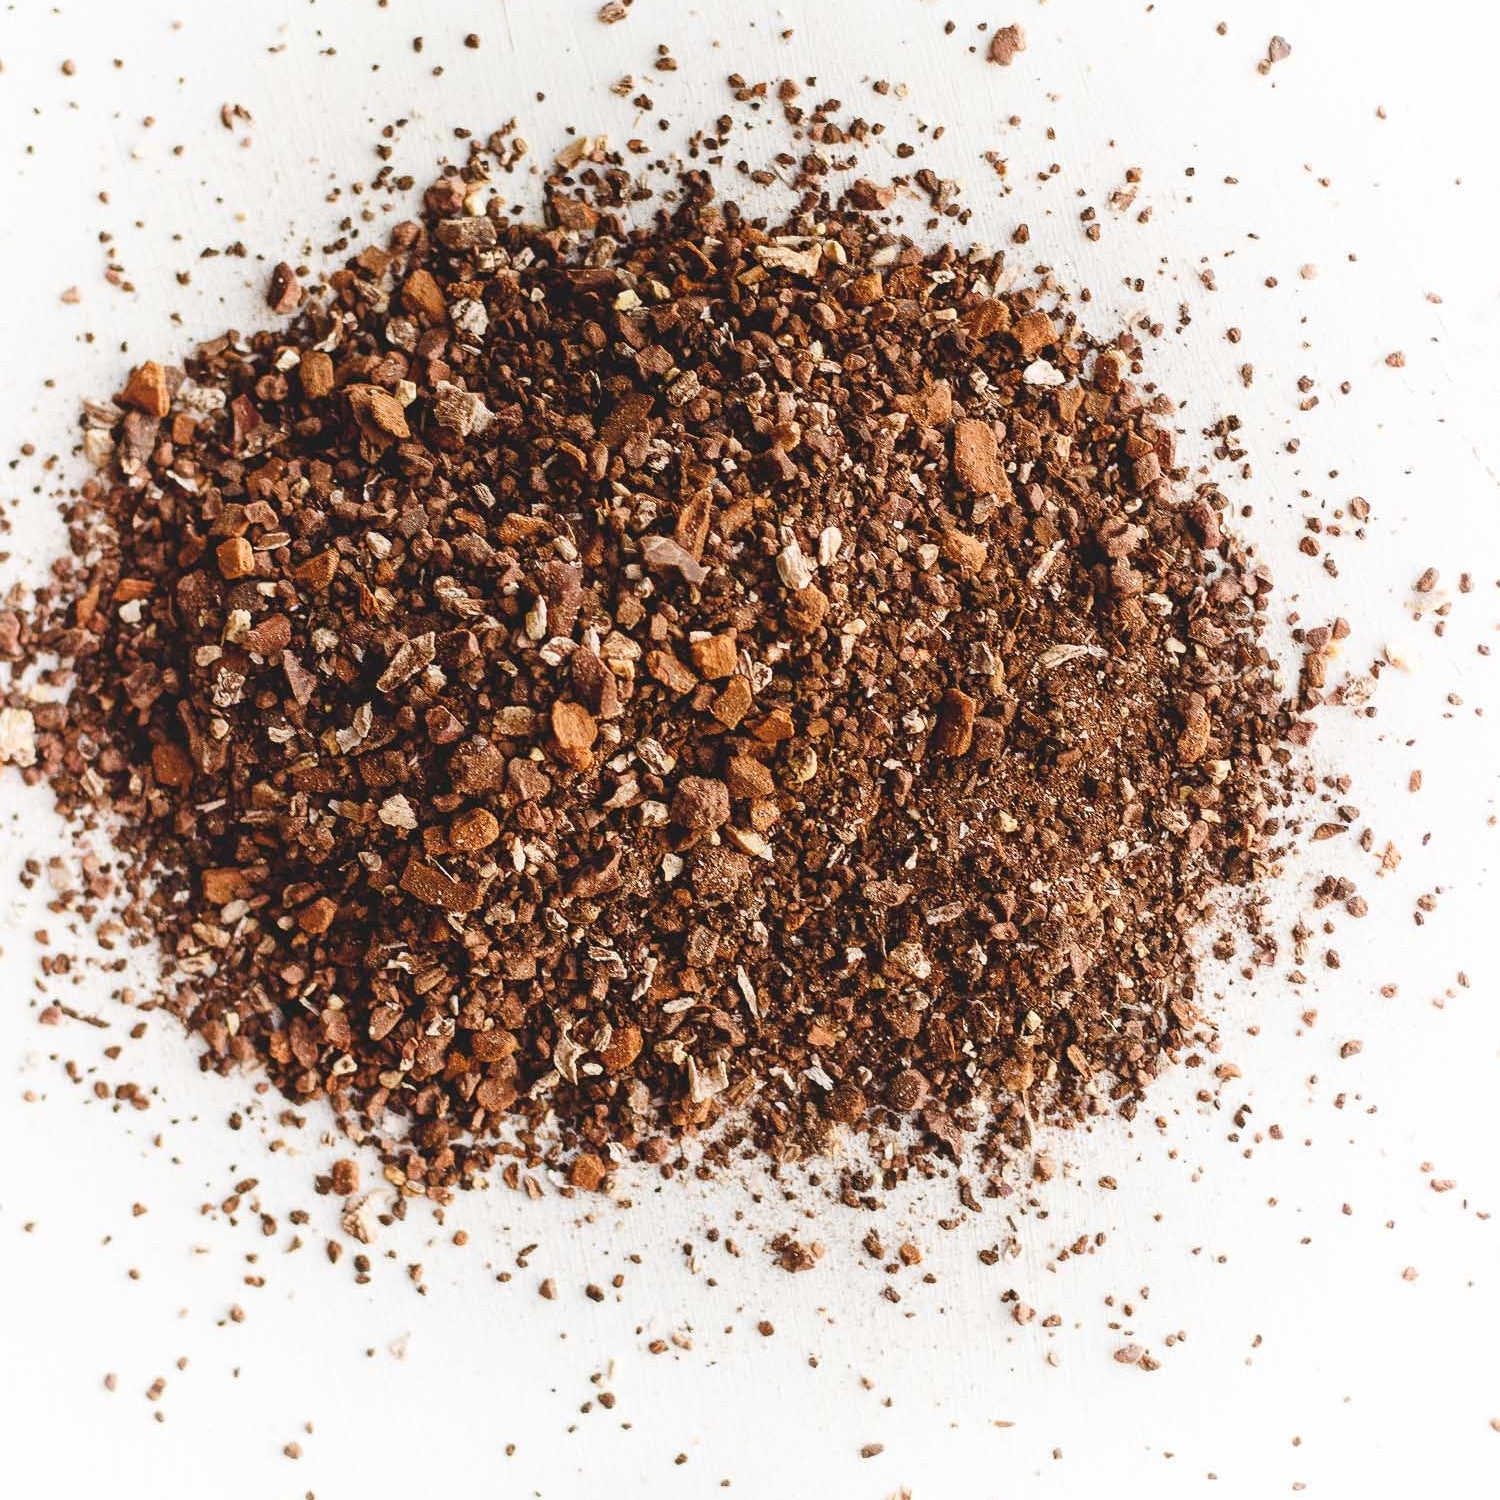 A pile of loose leaf Fake Coffee tea, an organic, energizing blend of cacao, roasted chicory, dandelion root, and sweet cinnamon. Touted as 'life-changing' by BuzzFeed, this tea mimics the feel of coffee while offering a chocolaty, herbaceous flavor and natural energy boost.